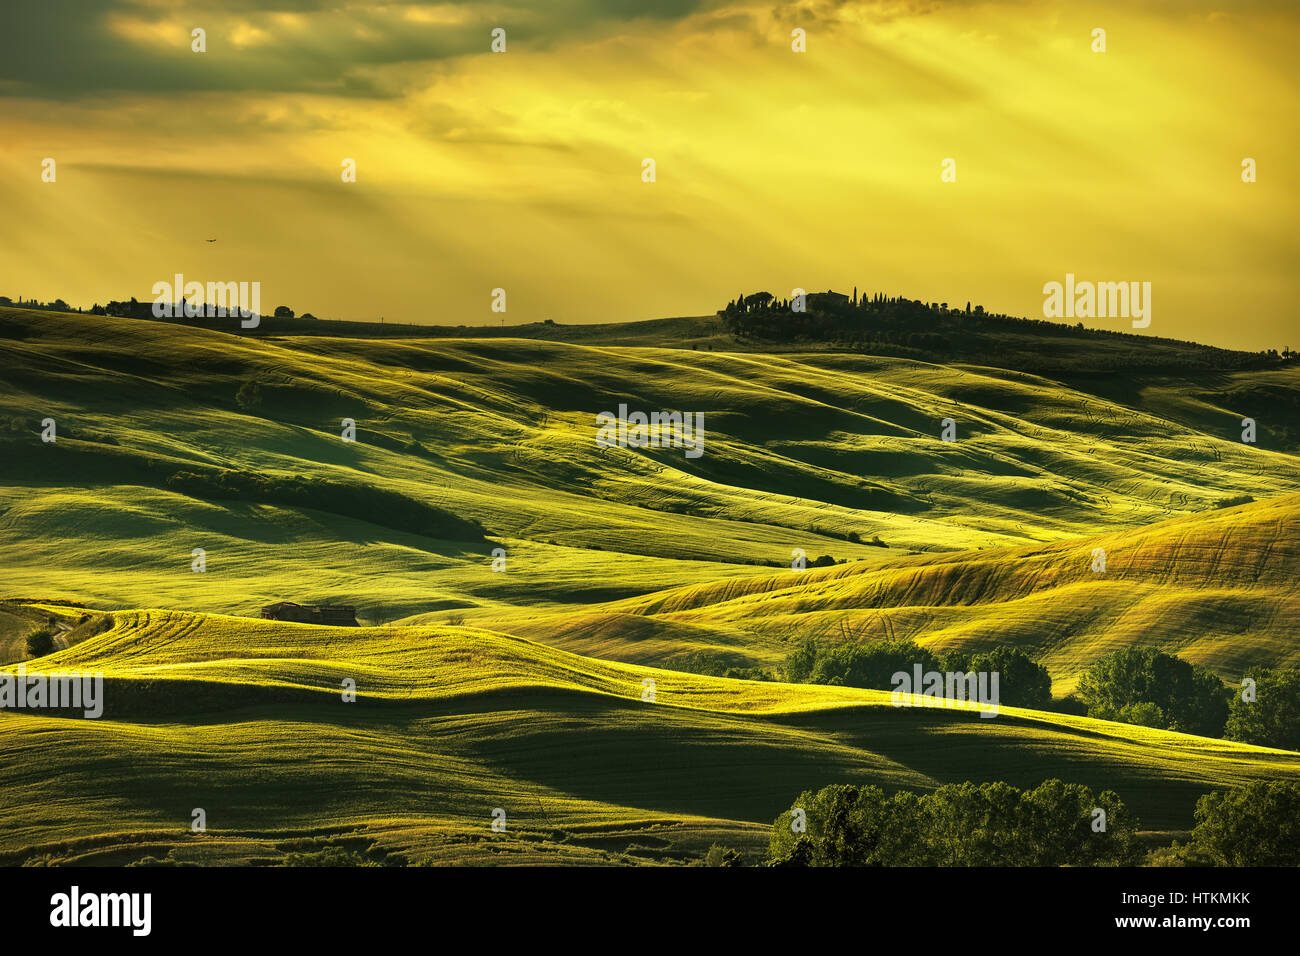 Tuscany spring, rolling hills on sunset. Rural landscape. Green fields and farmlands. Italy, Europe Stock Photo